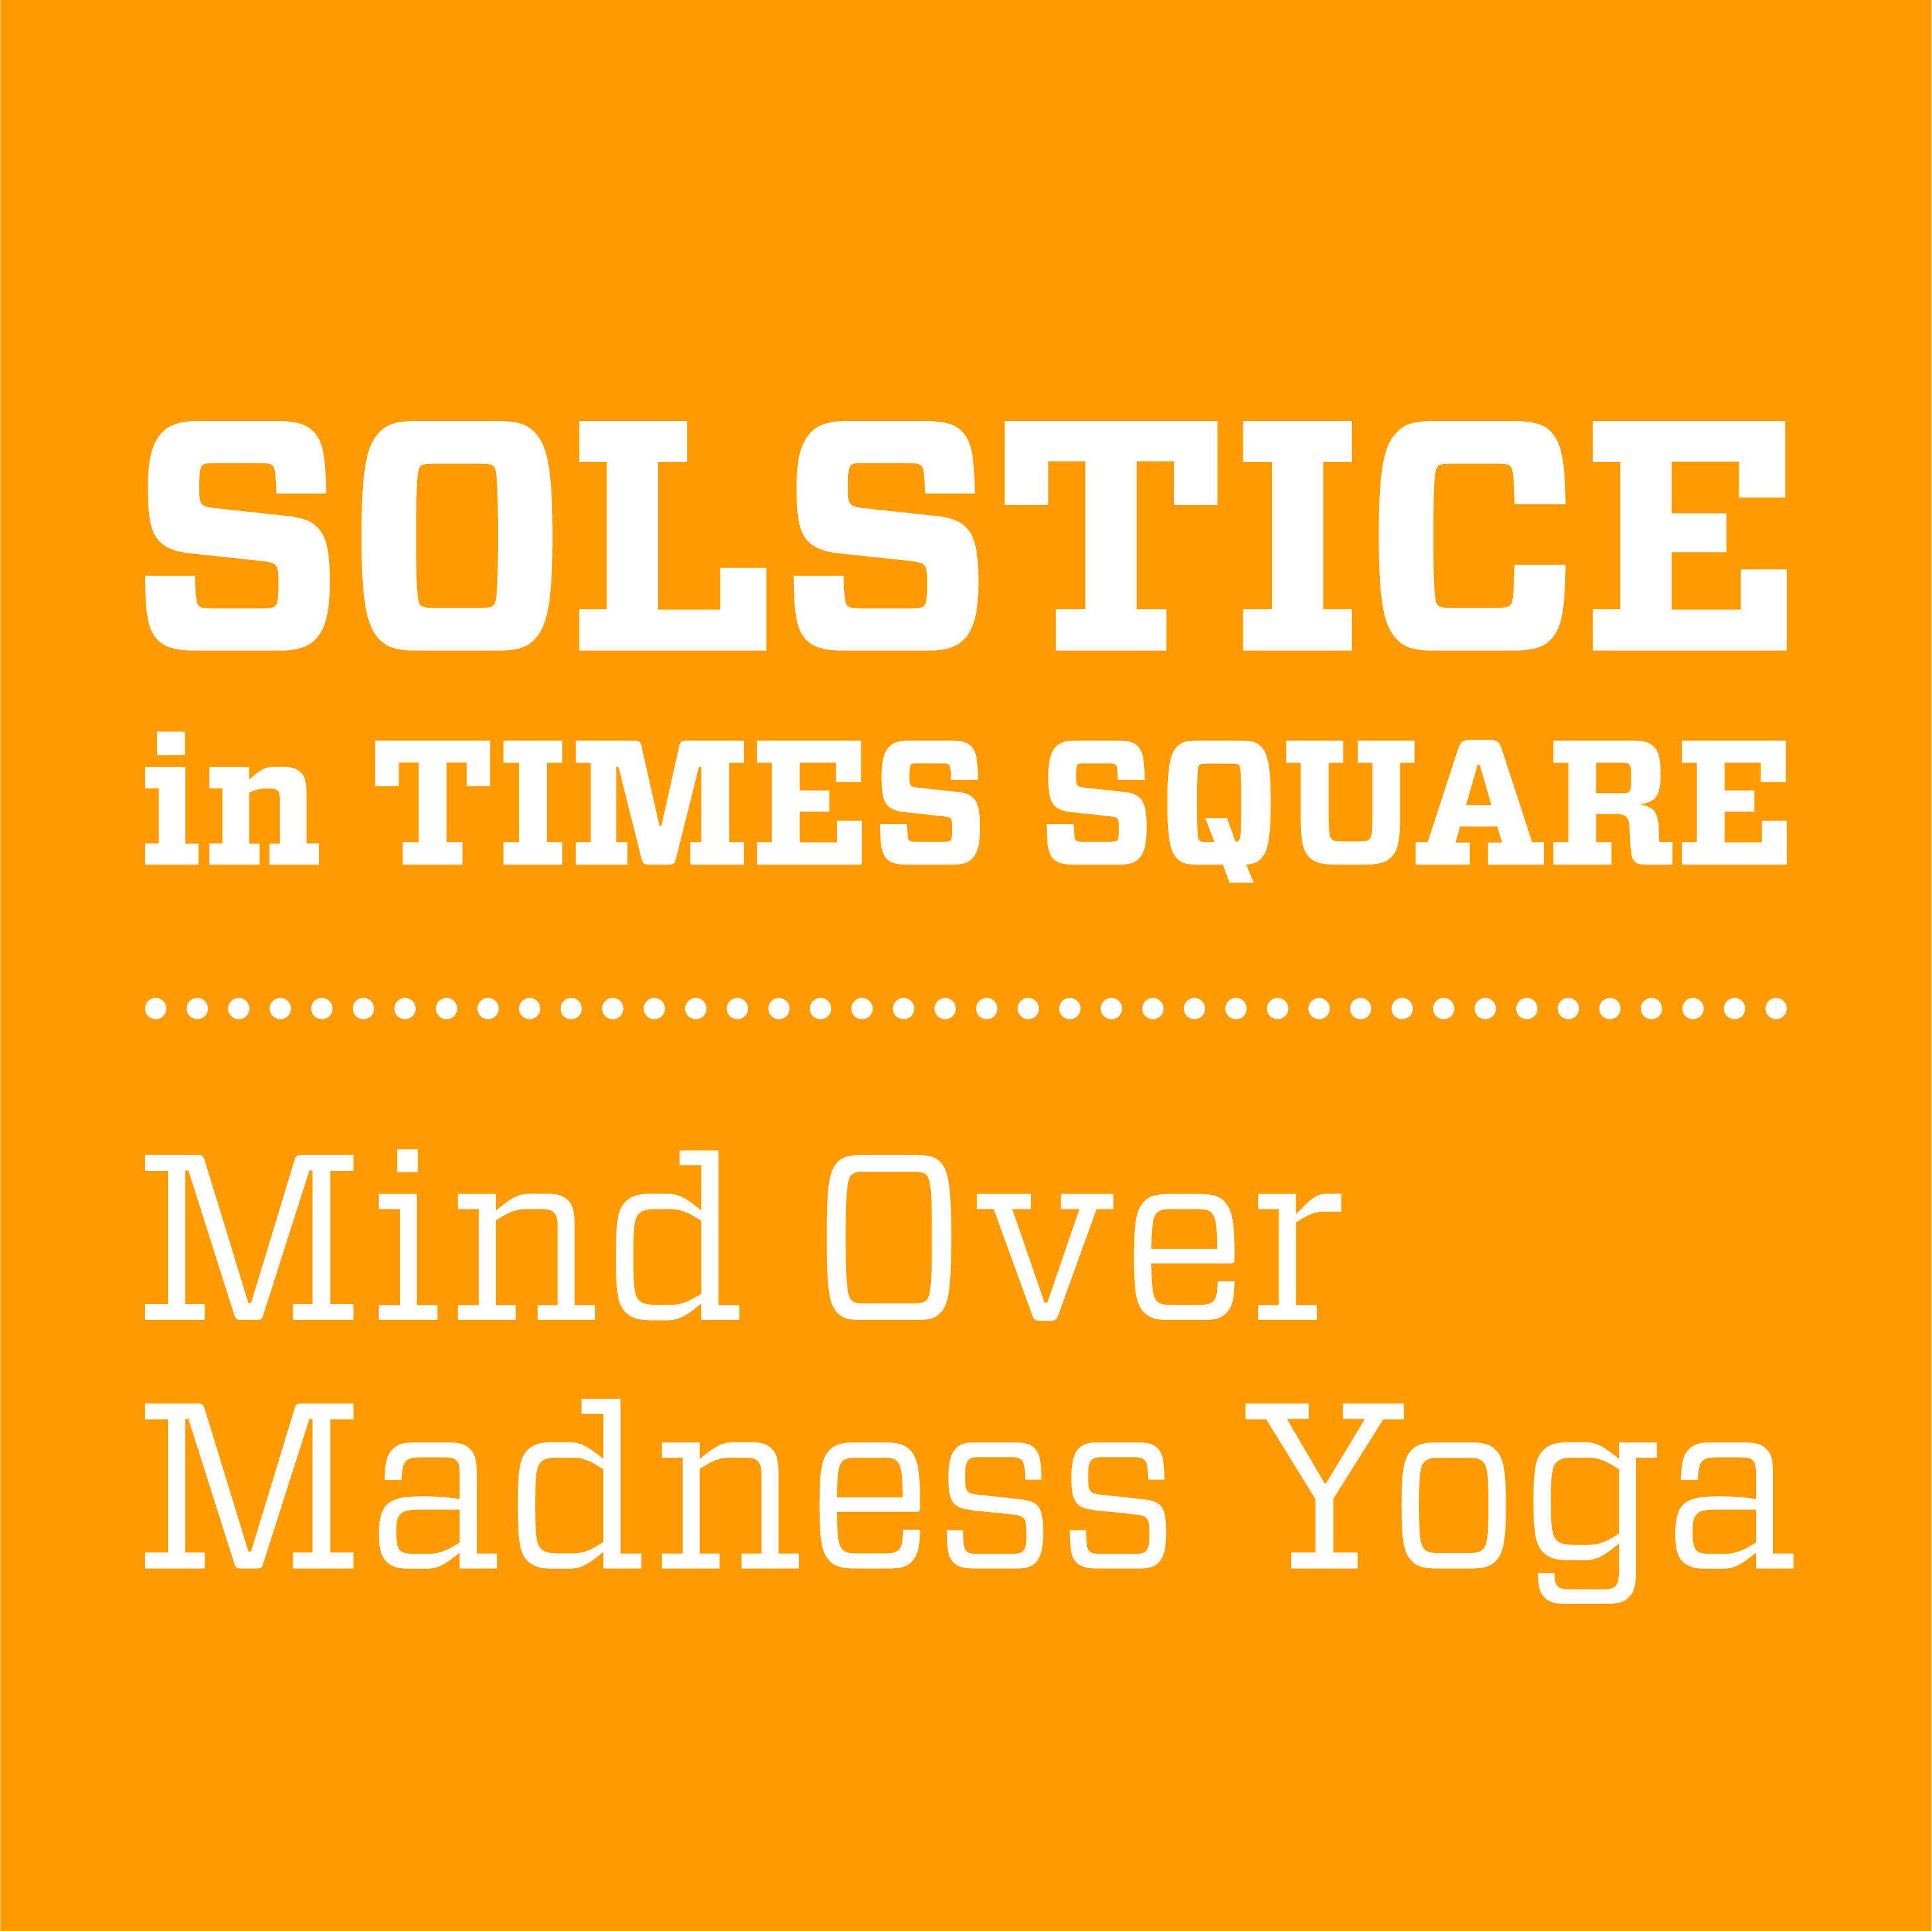 Times Square Logo - Solstice in Times Square | Times Square NYC